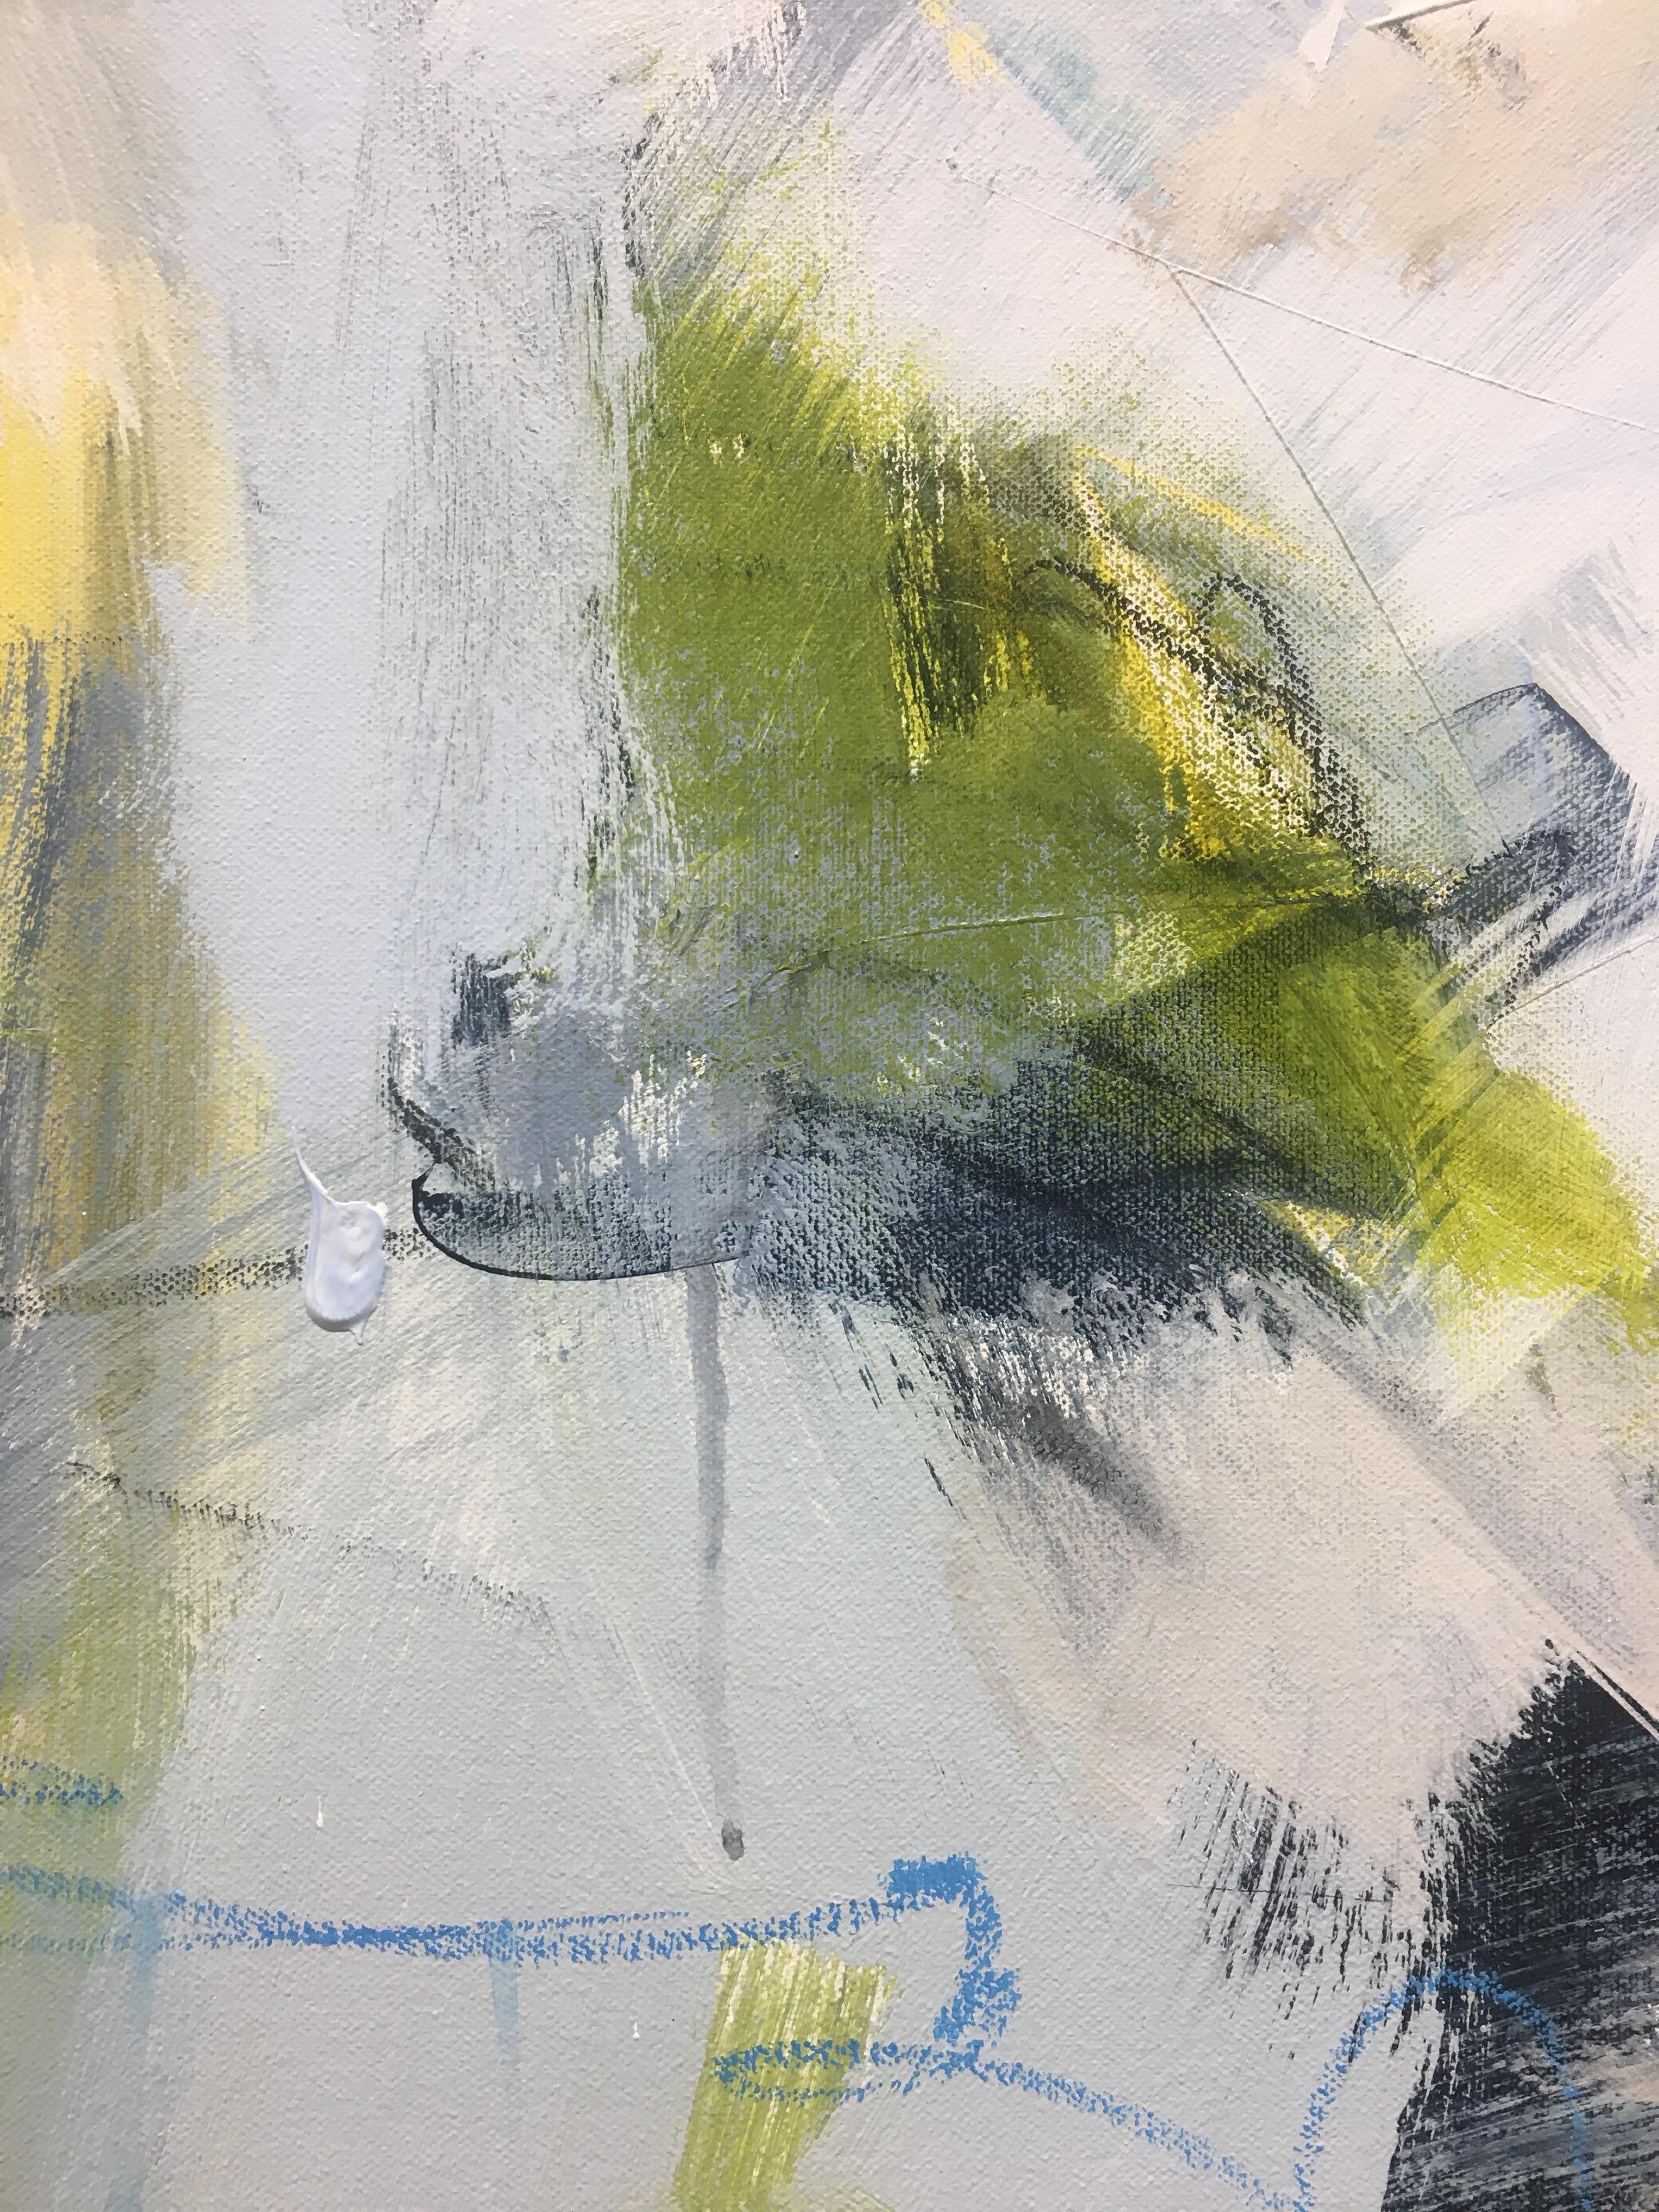 This abstract expressionist, large-scale painting is mixed media on canvas. Maria Burtis works with graphite, pastels, and acrylic primarily, and the unique textures and layers of each material is evident in her work. The artist makes small, daily